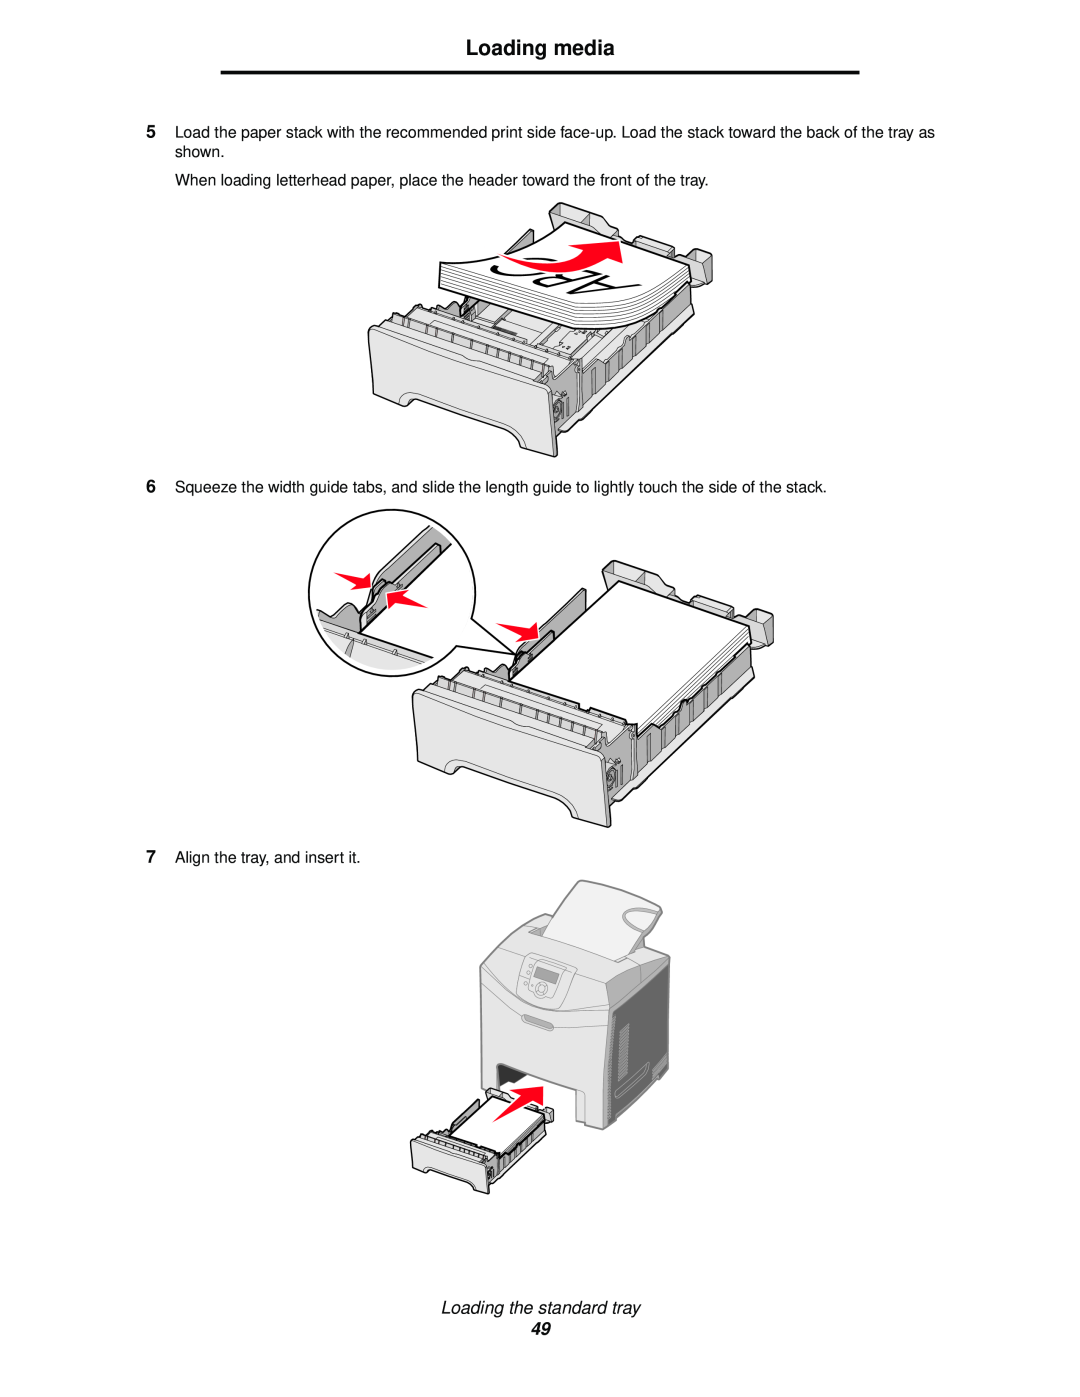 Lexmark C520, C524, C522 manual Loading media, Loading the standard tray, Align the tray, and insert it 